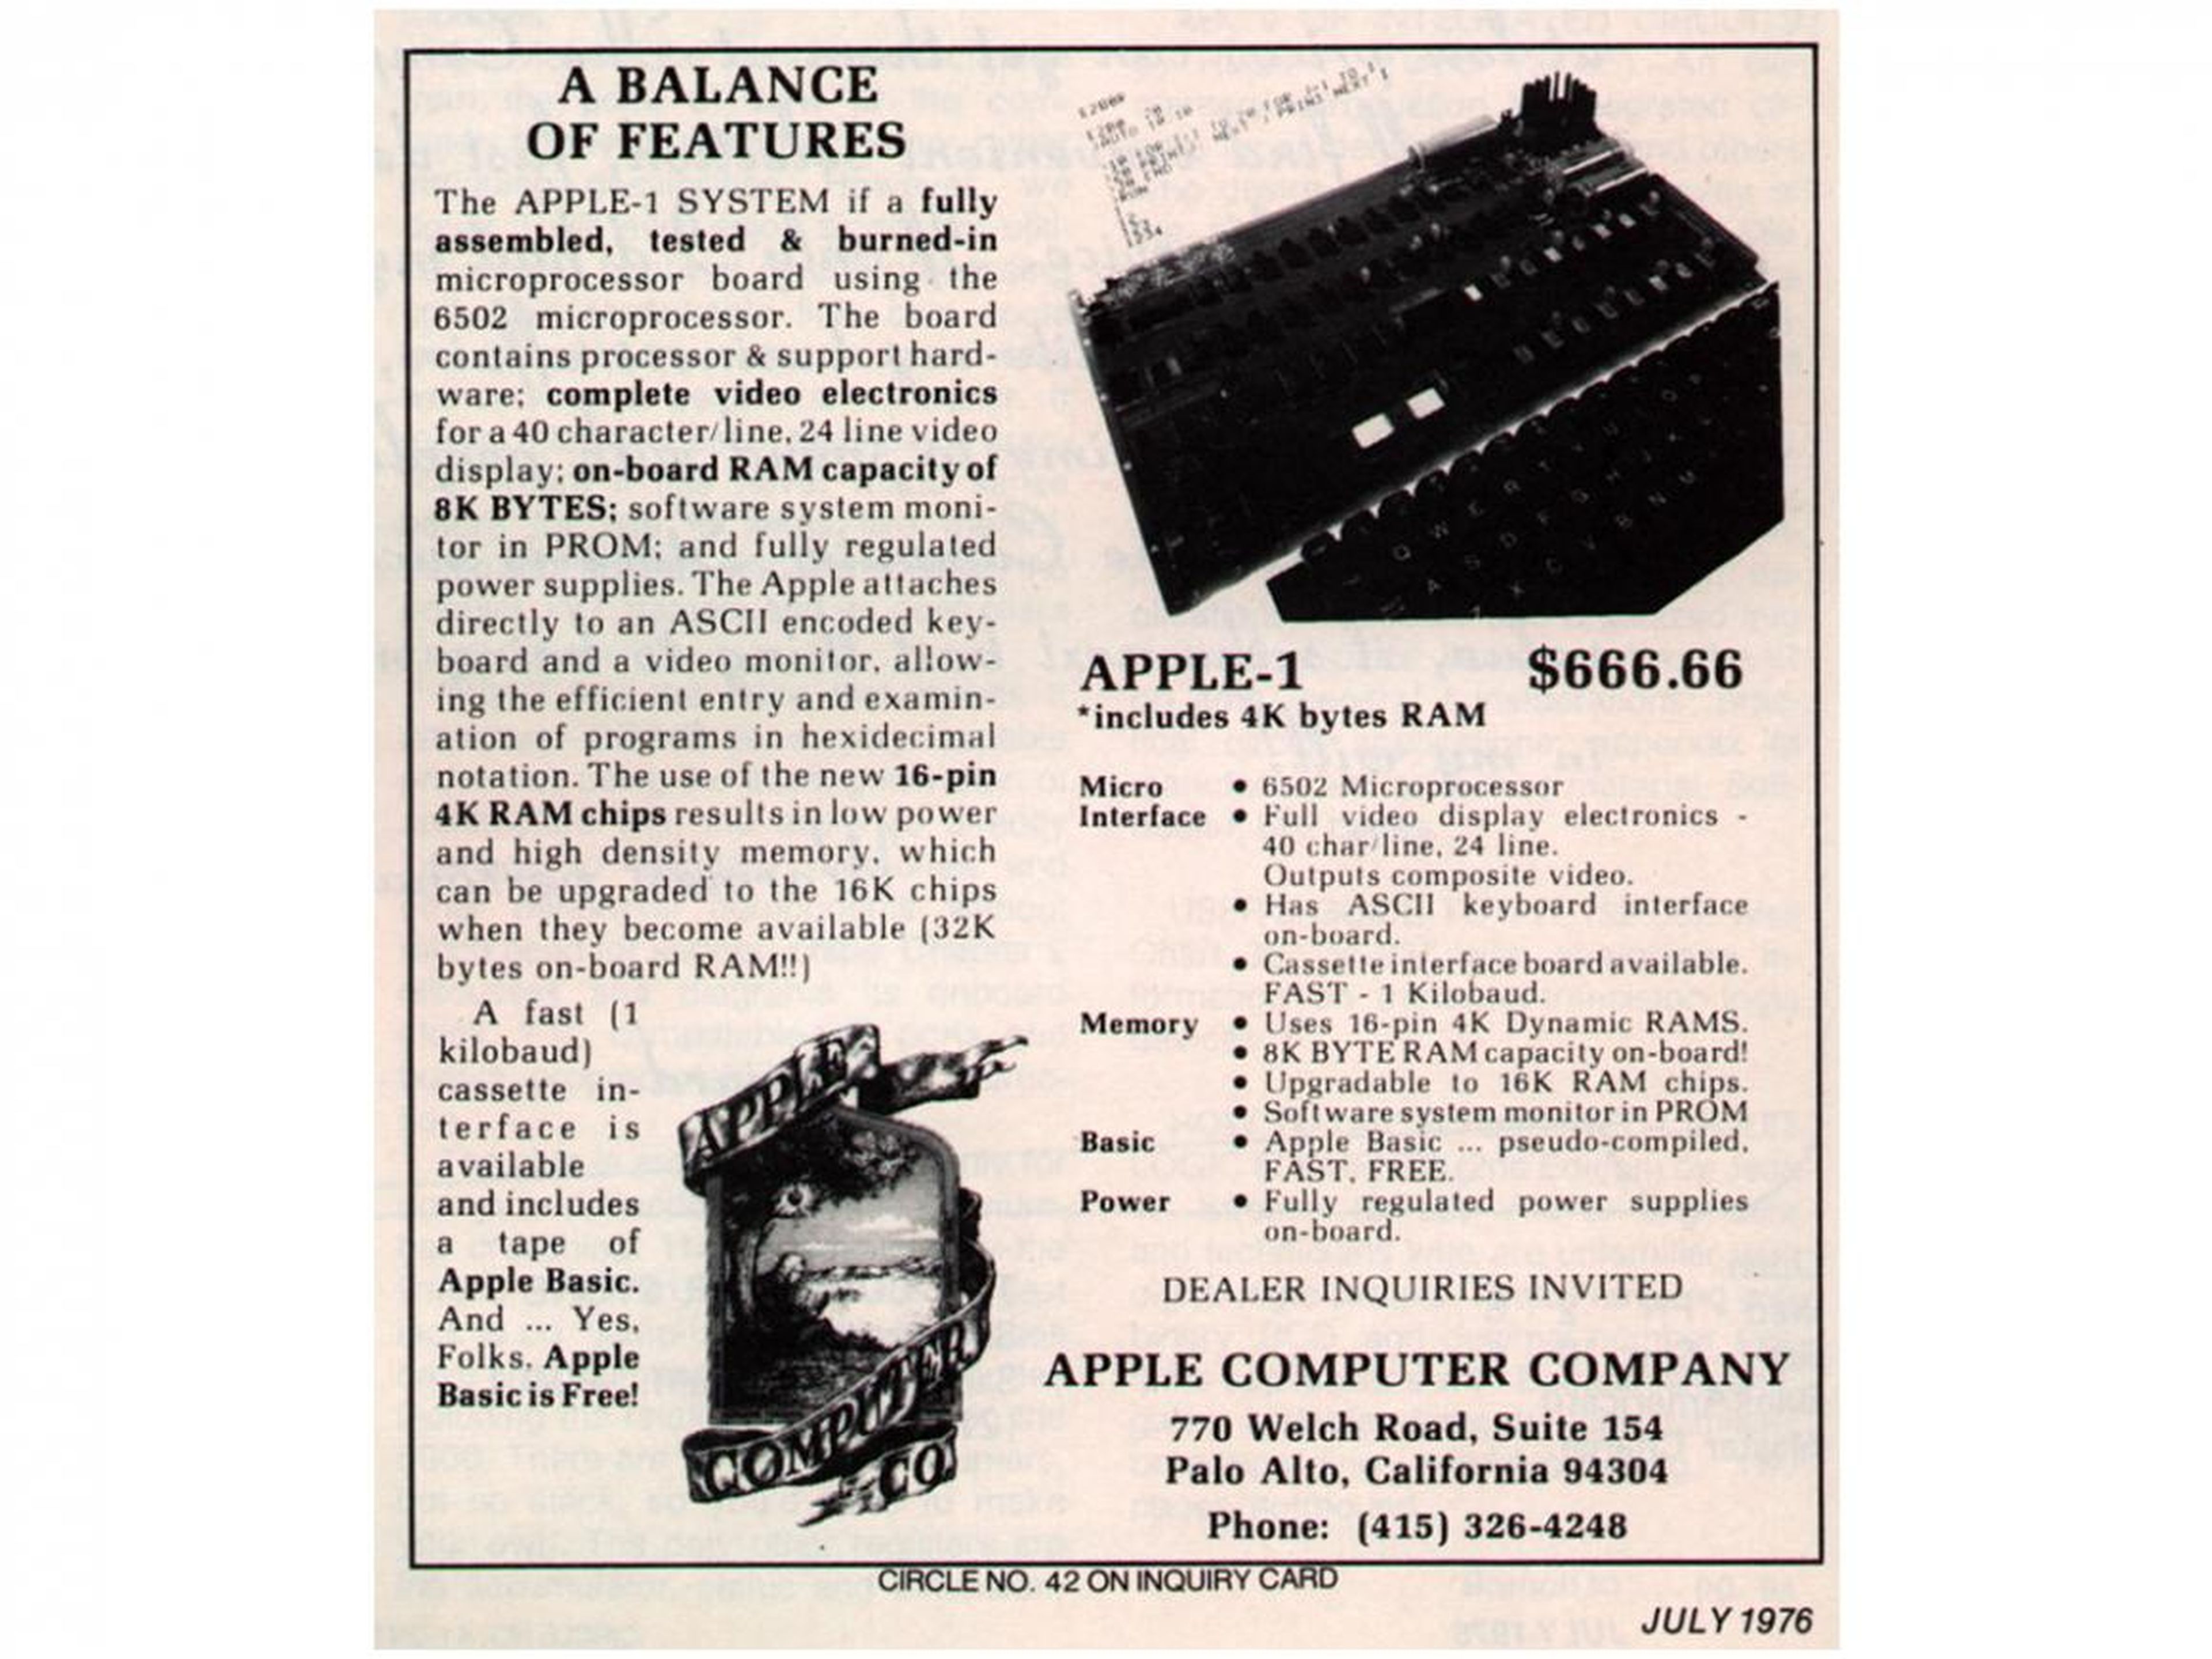 One of Apple's first ads from the 1970s.